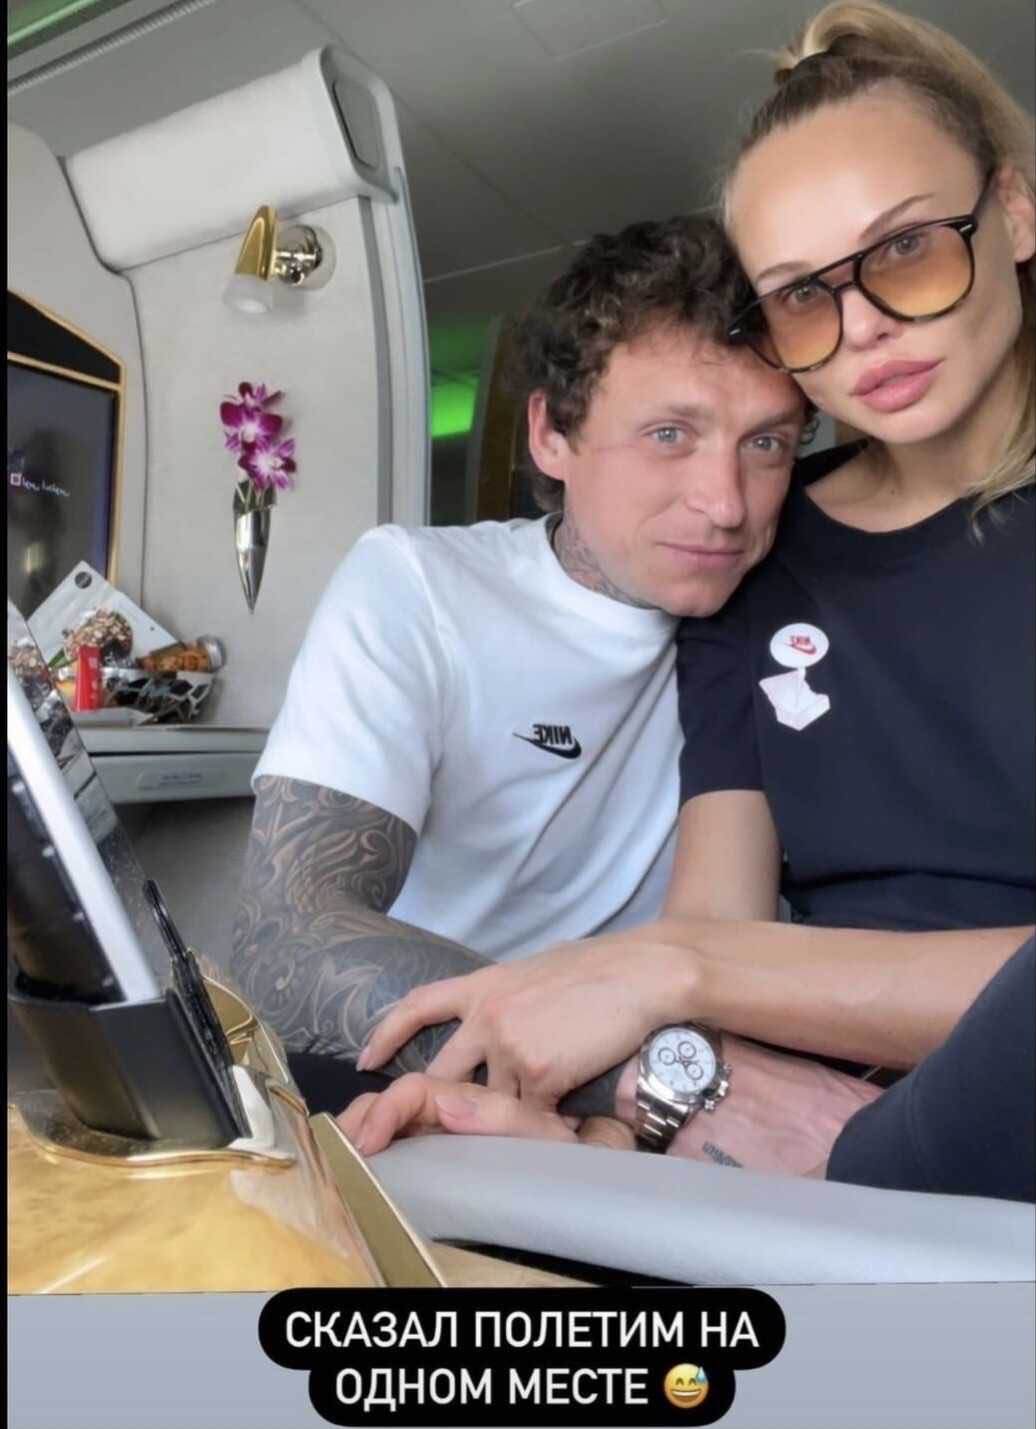 Pavel Mamaev and his fiancee were detained at customs